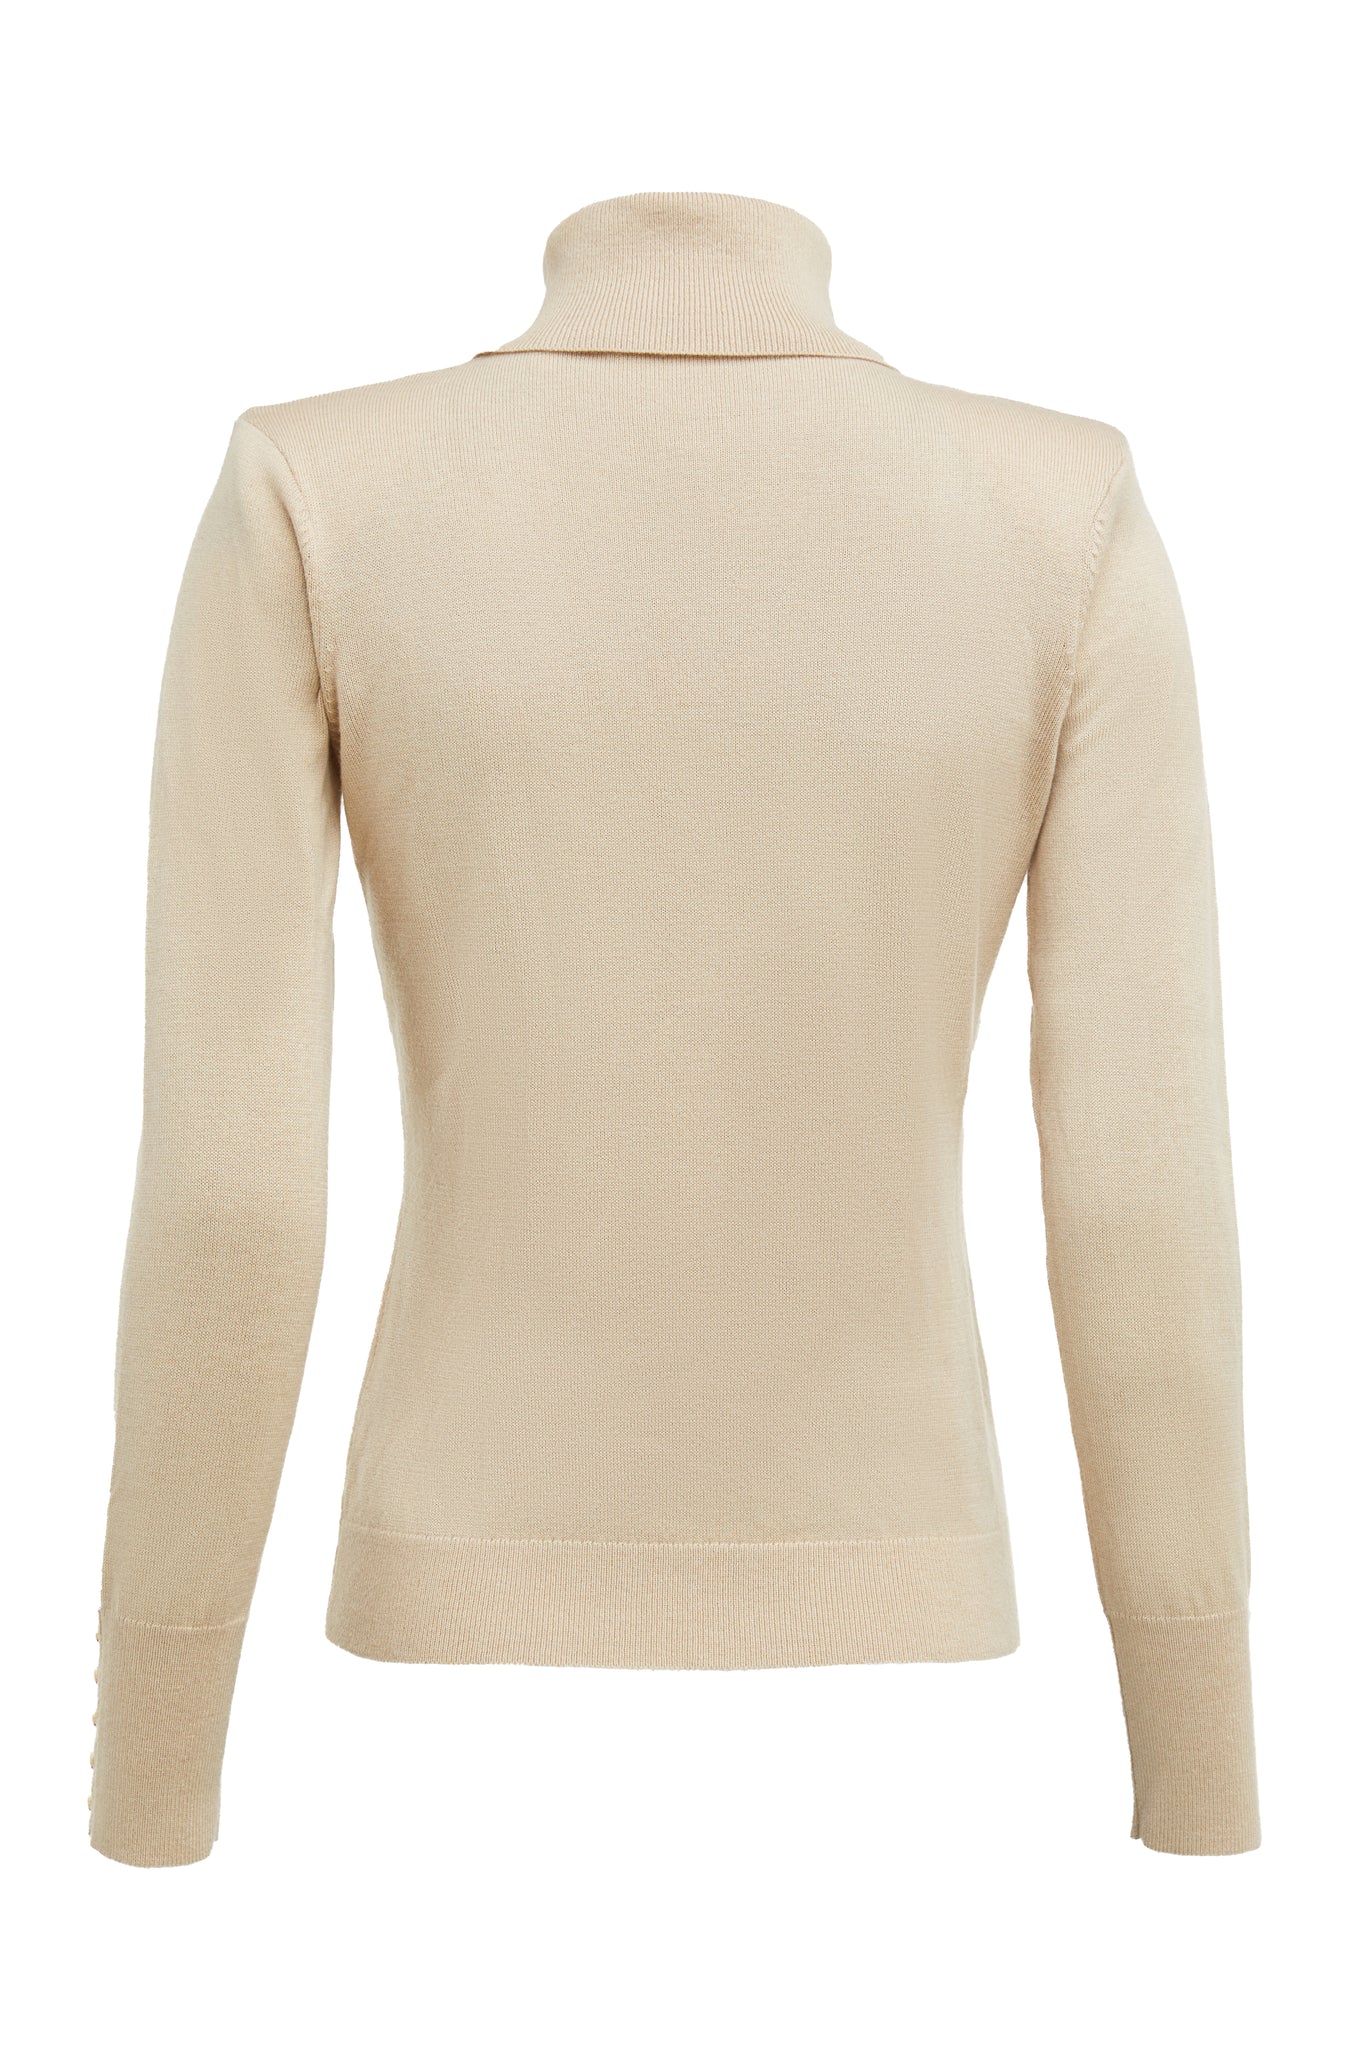 back of cashmere blend lightweight Roll neck knit in stone with shoulder pads 